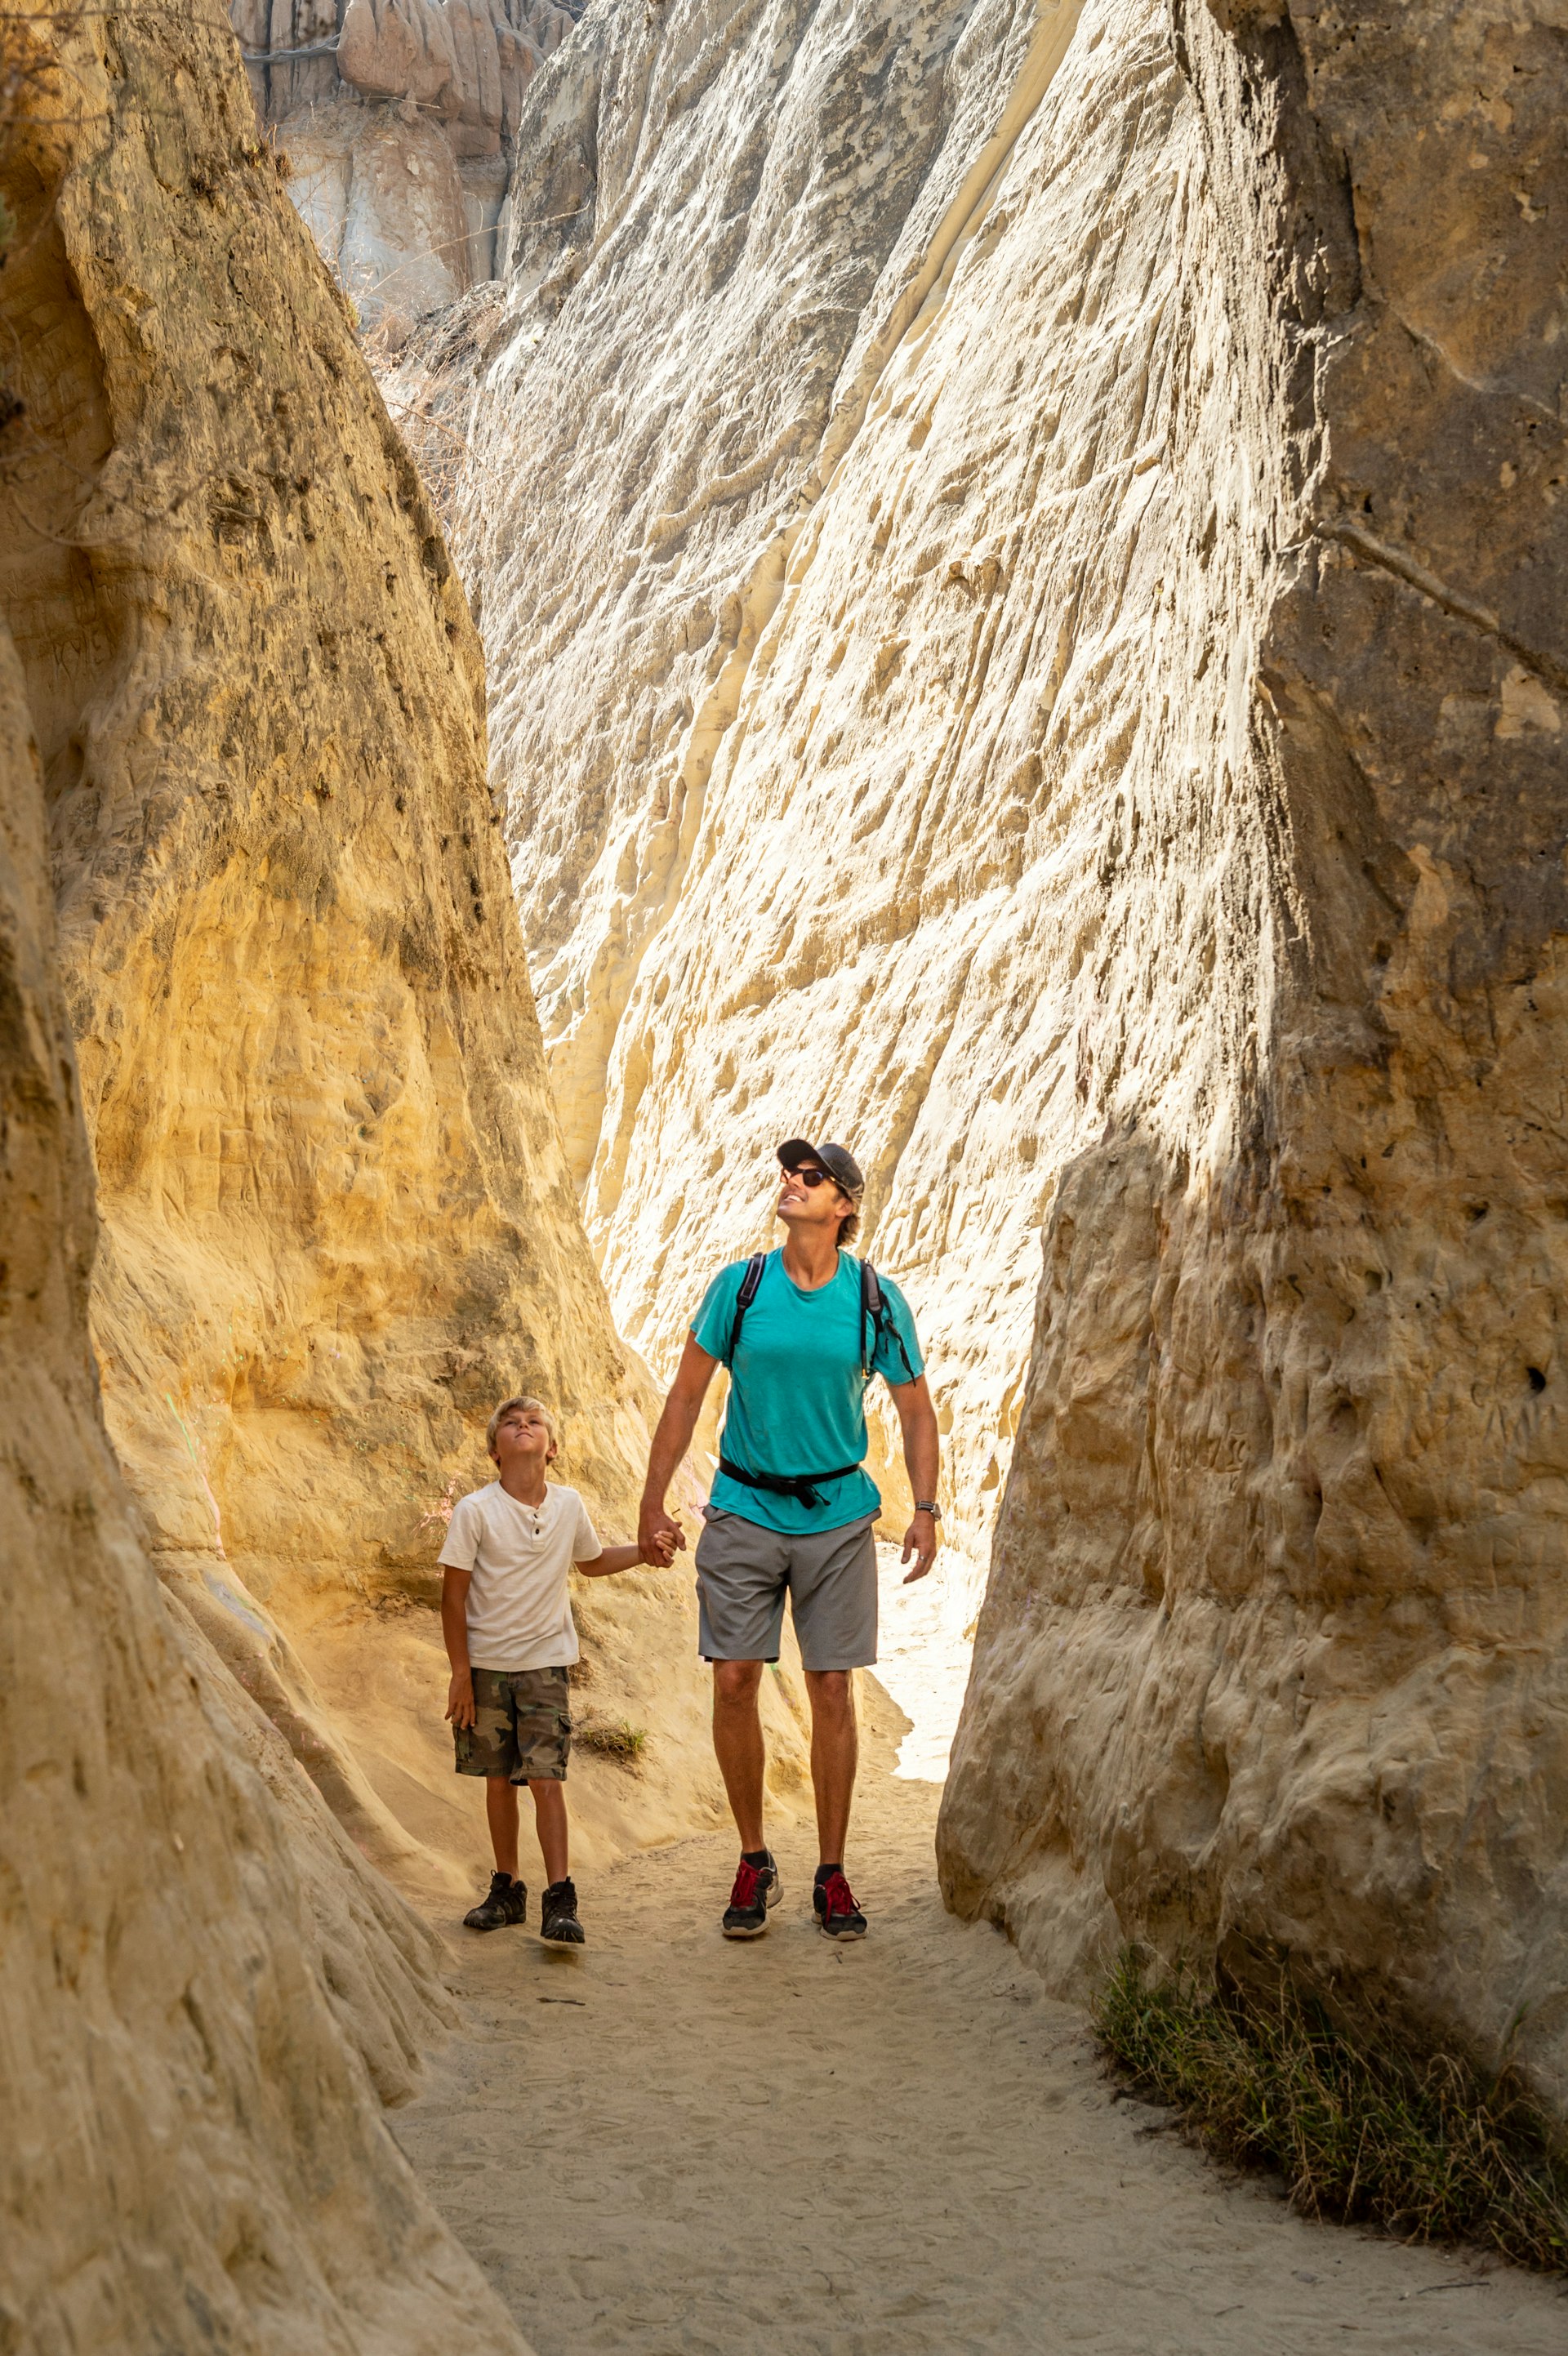 Dad and Son Hiking in a Canyon